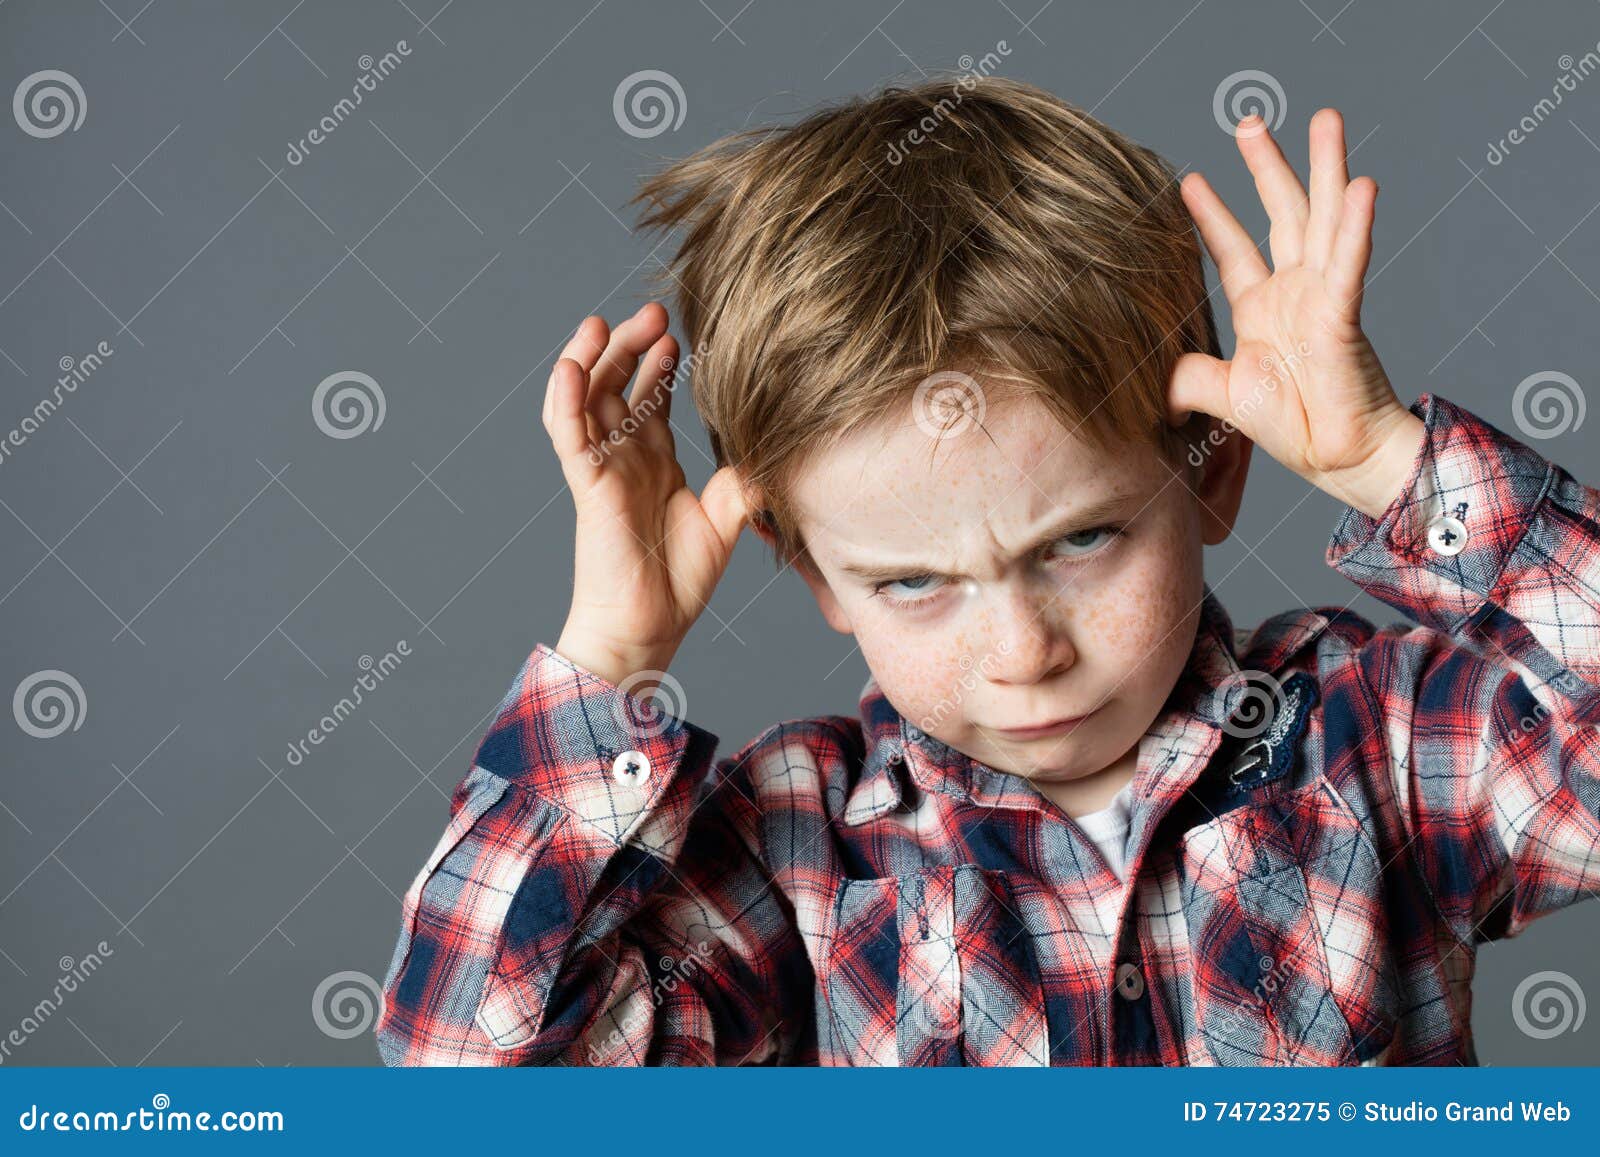 rude kid playing with hands making face for determined attitude